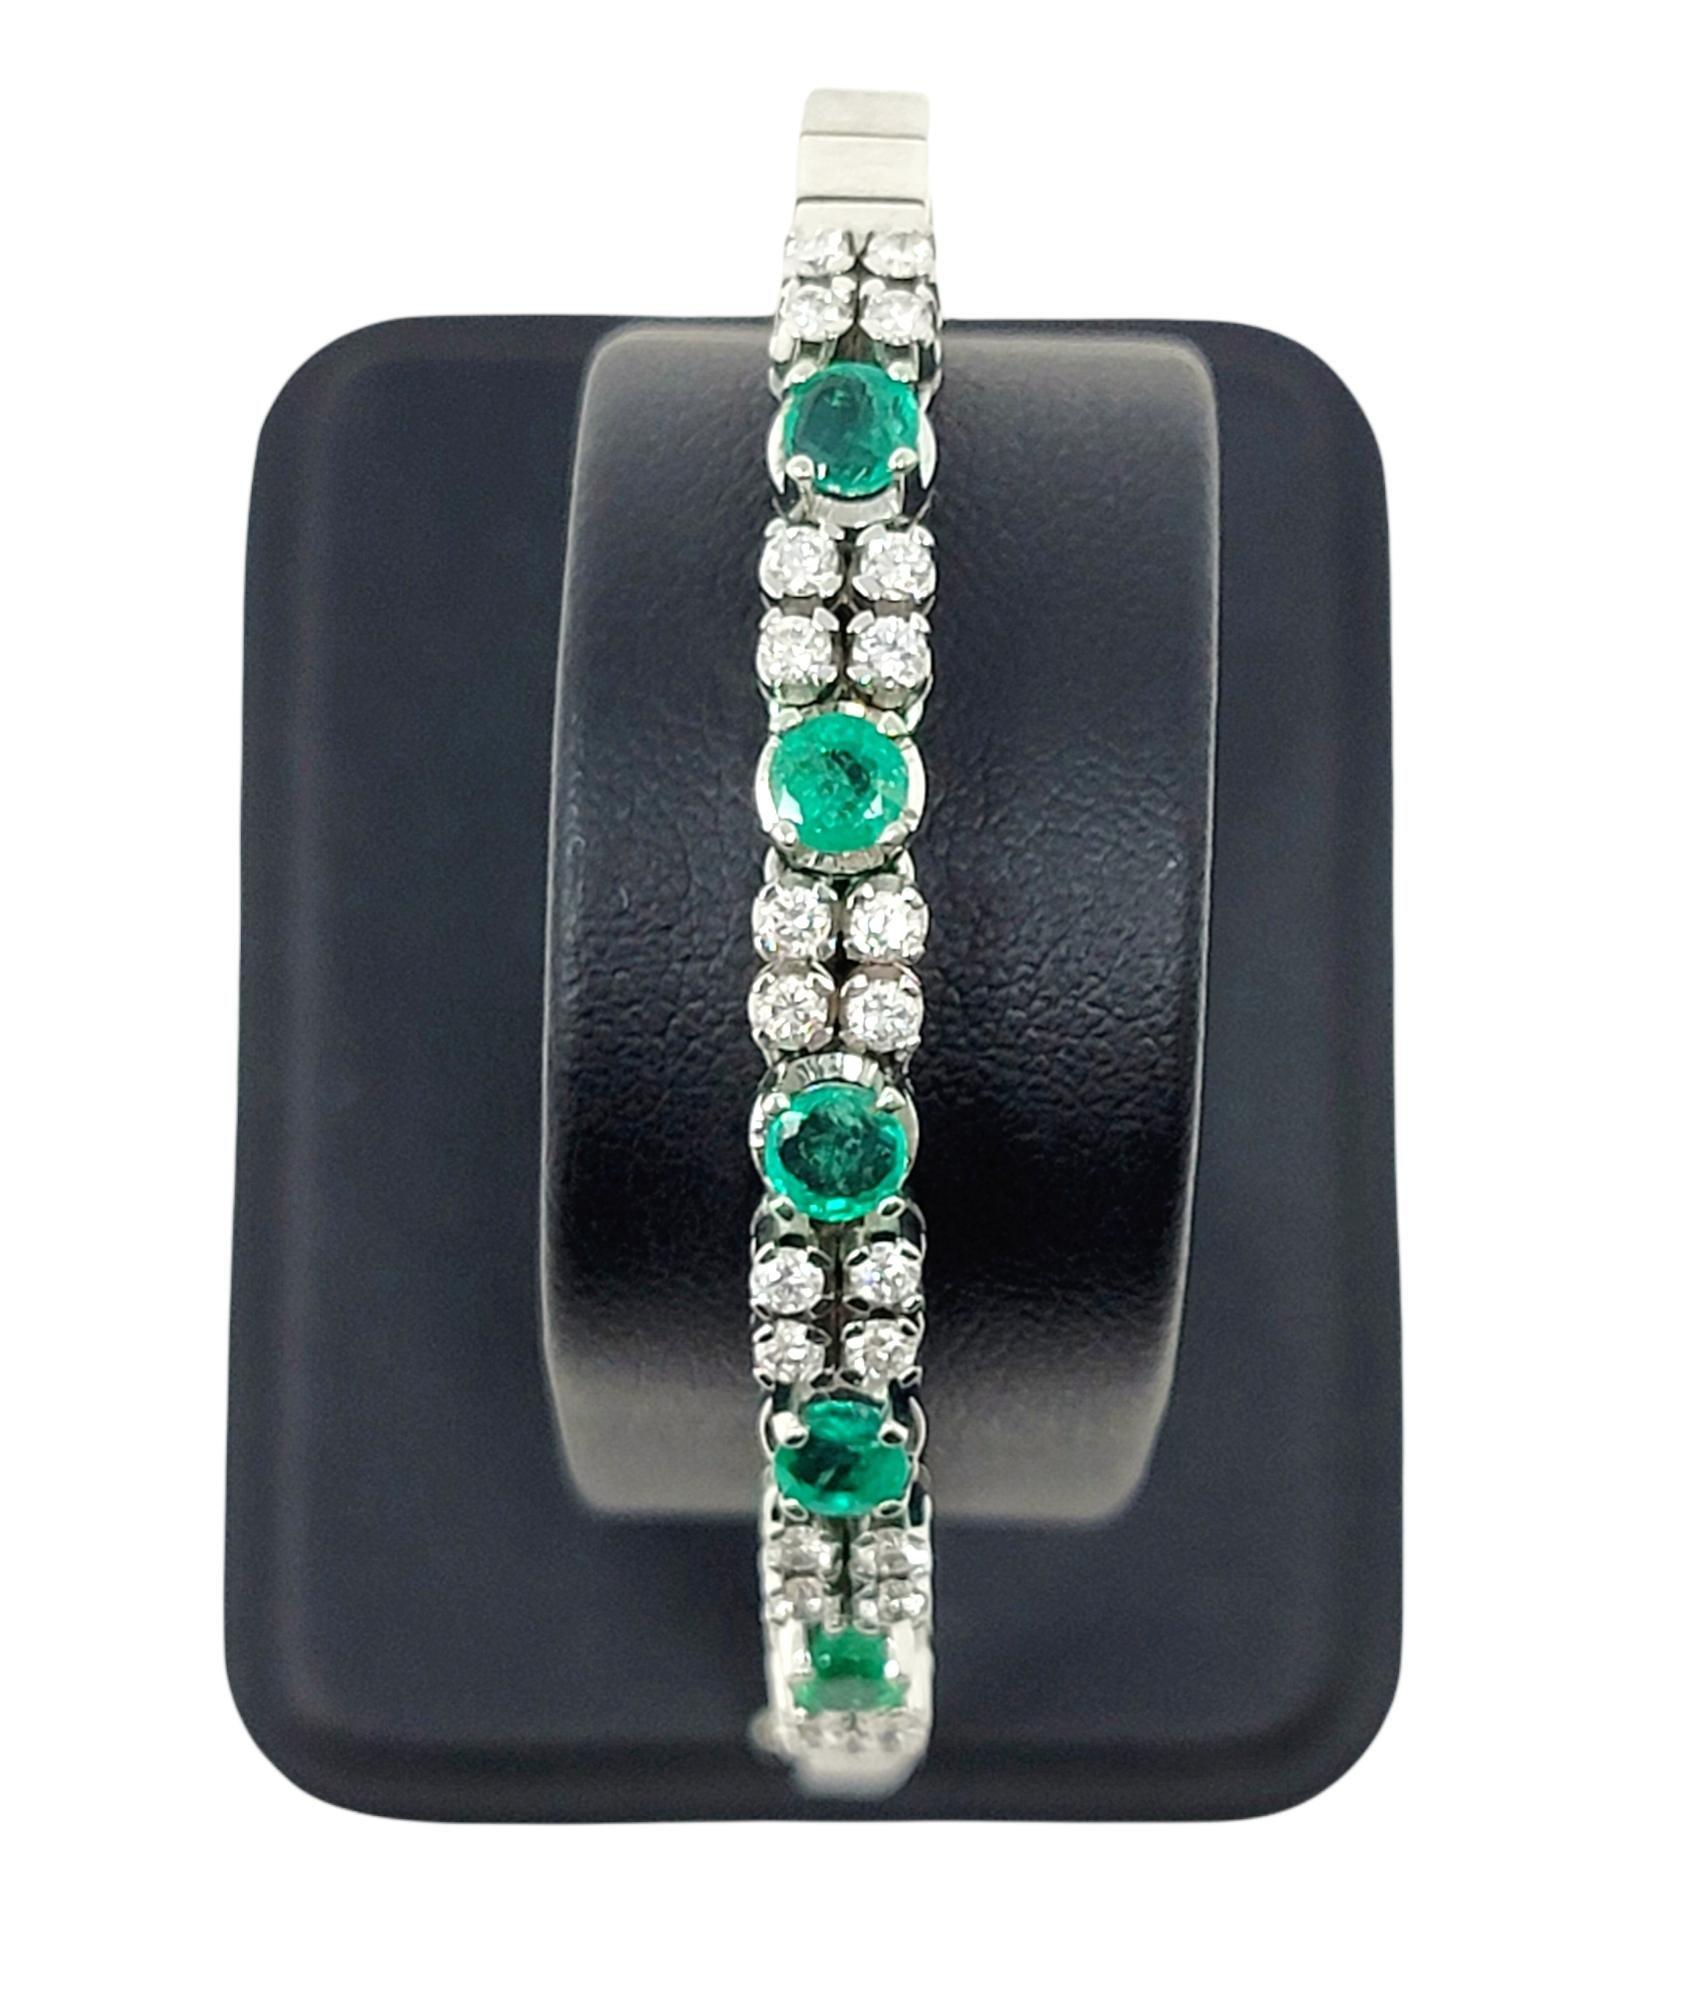 1.82 Carats Round Diamond and Emerald Link Bracelet in 18 Karat White Gold For Sale 7